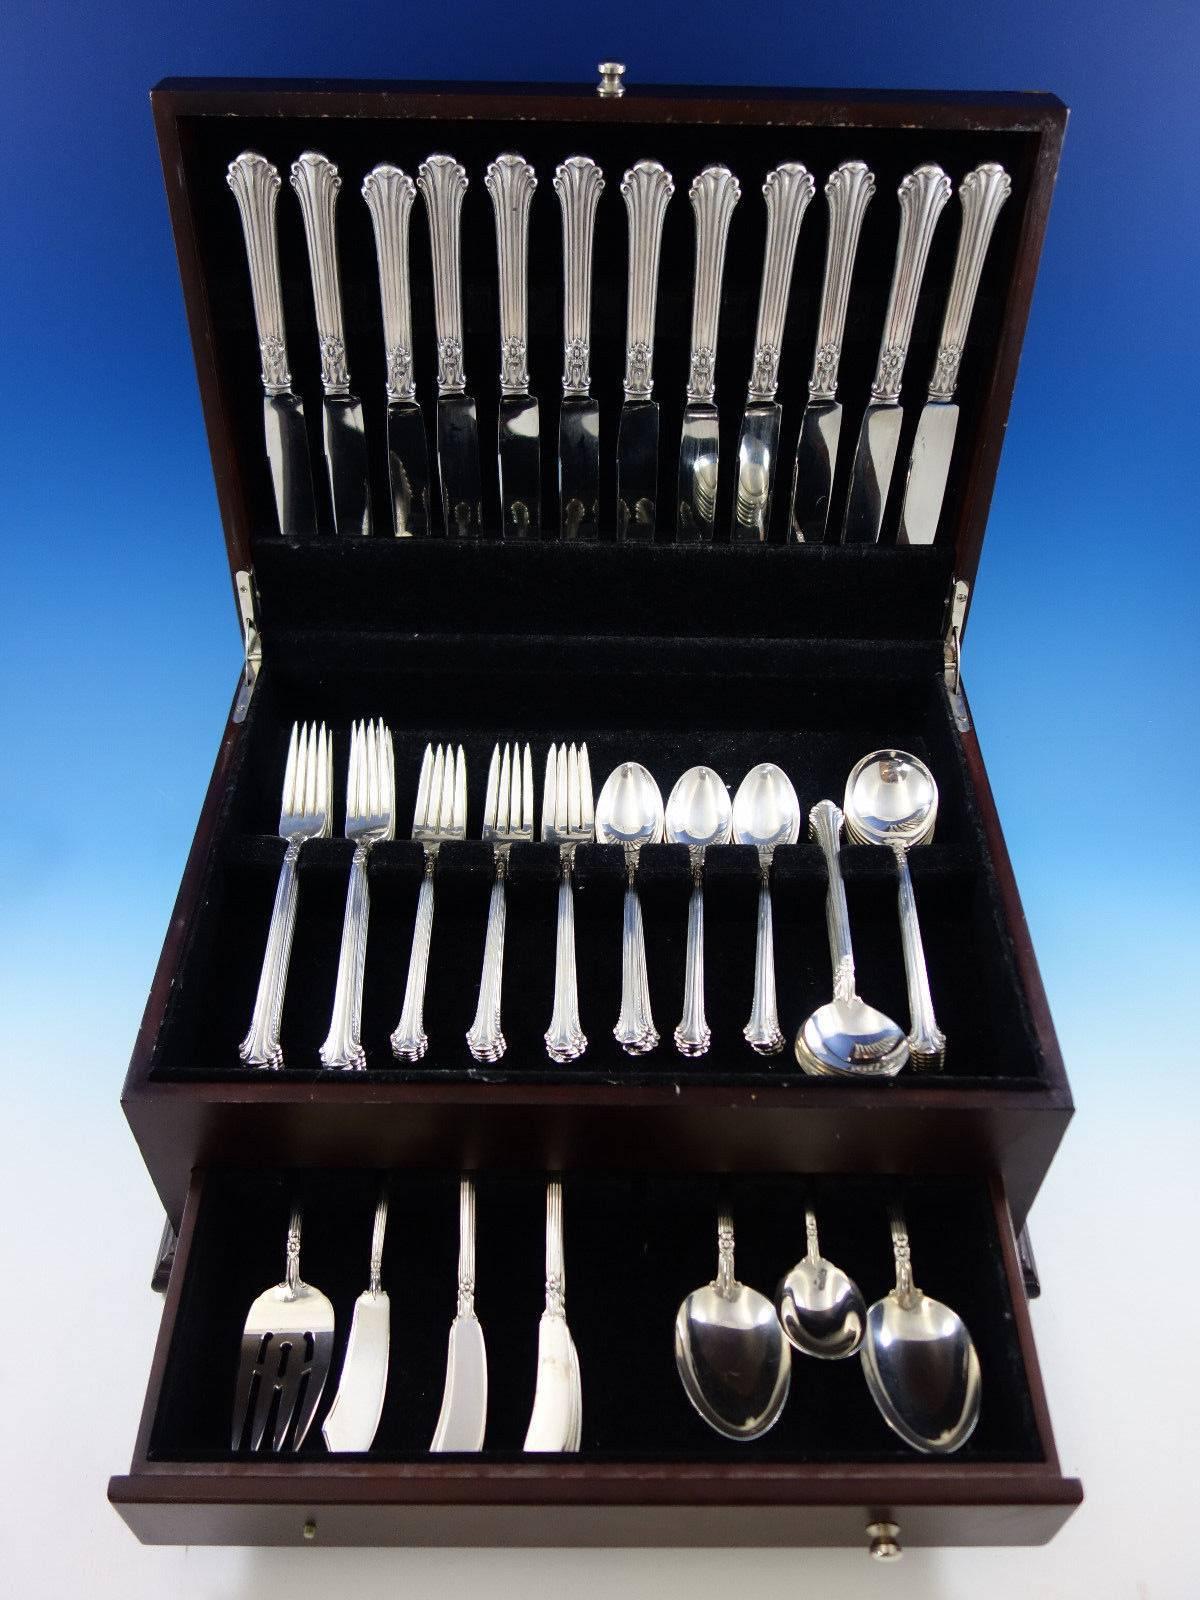 Silver Plumes by Towle sterling silver flatware set - 77 pieces. This set includes: 12 knives, 9 3/8